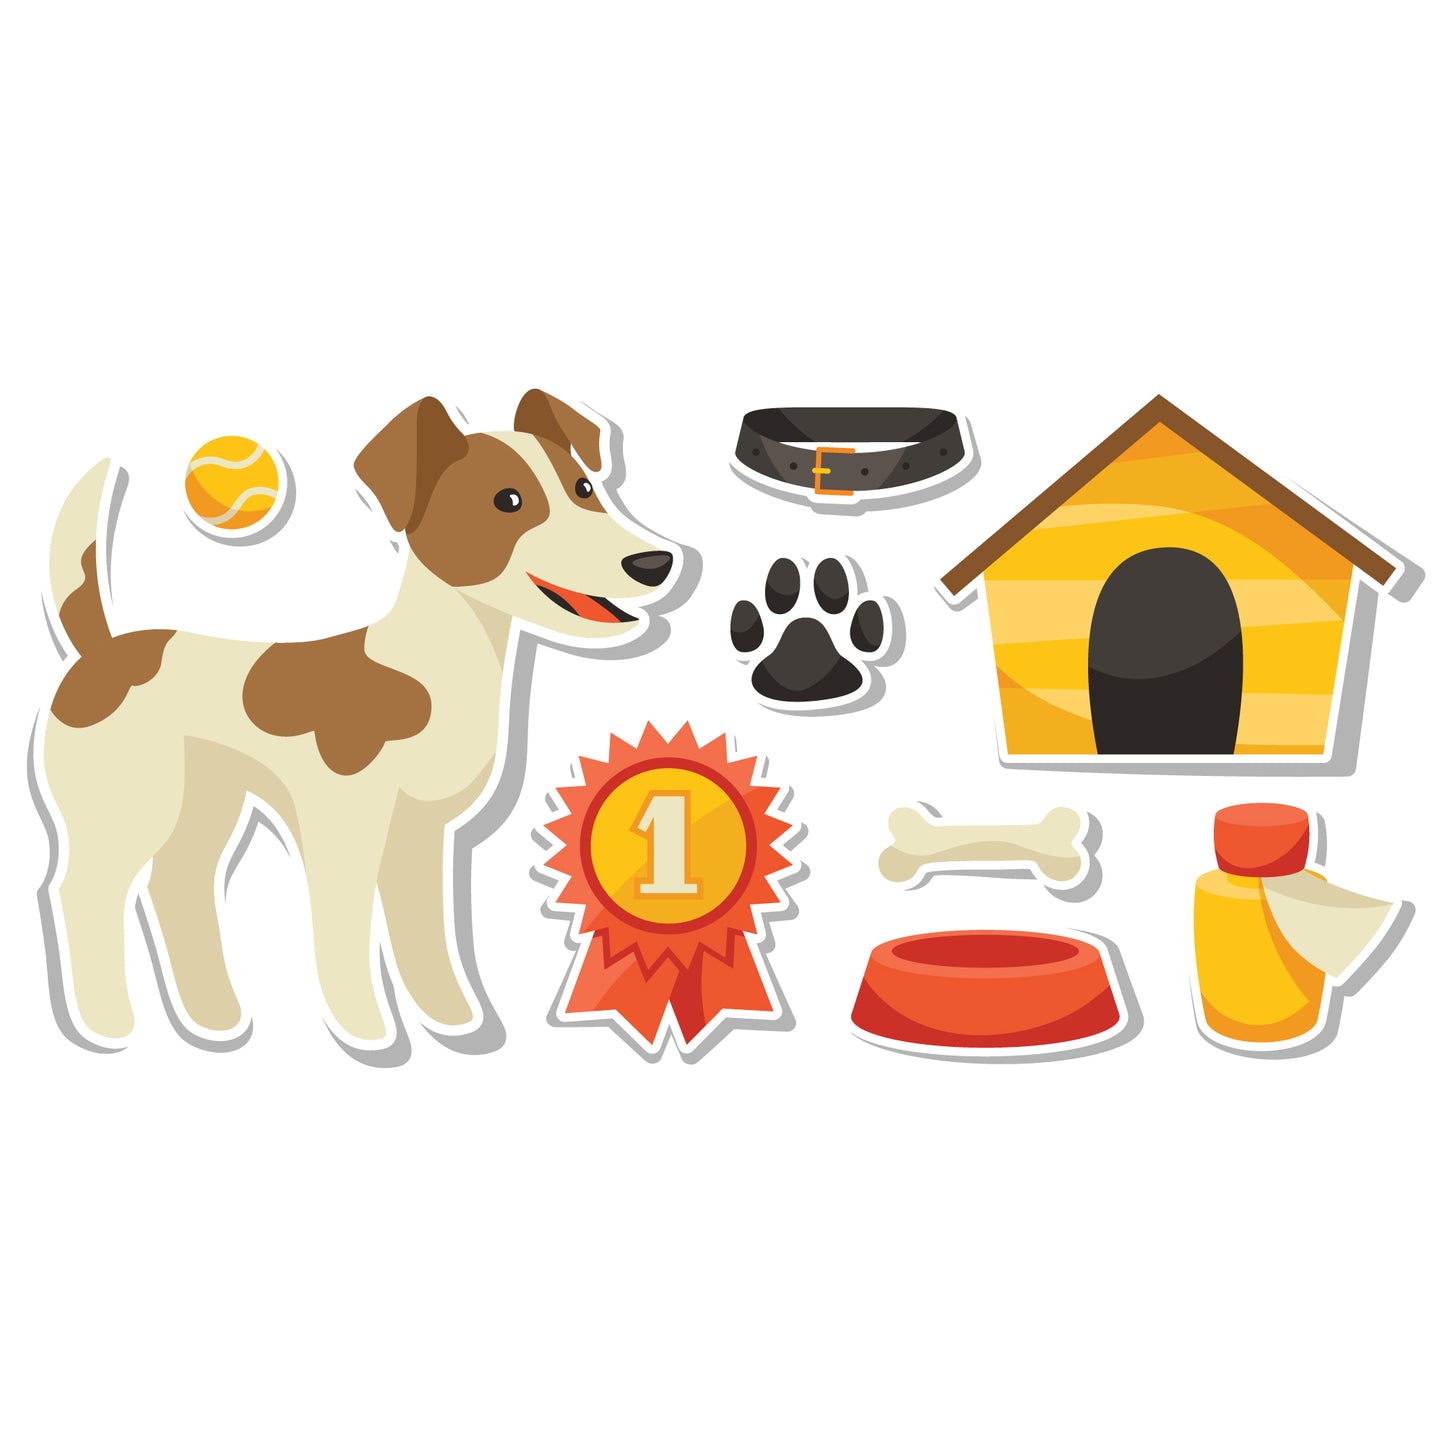 Dog Wall Sticker - Dog House and Toys Decal Wall Art